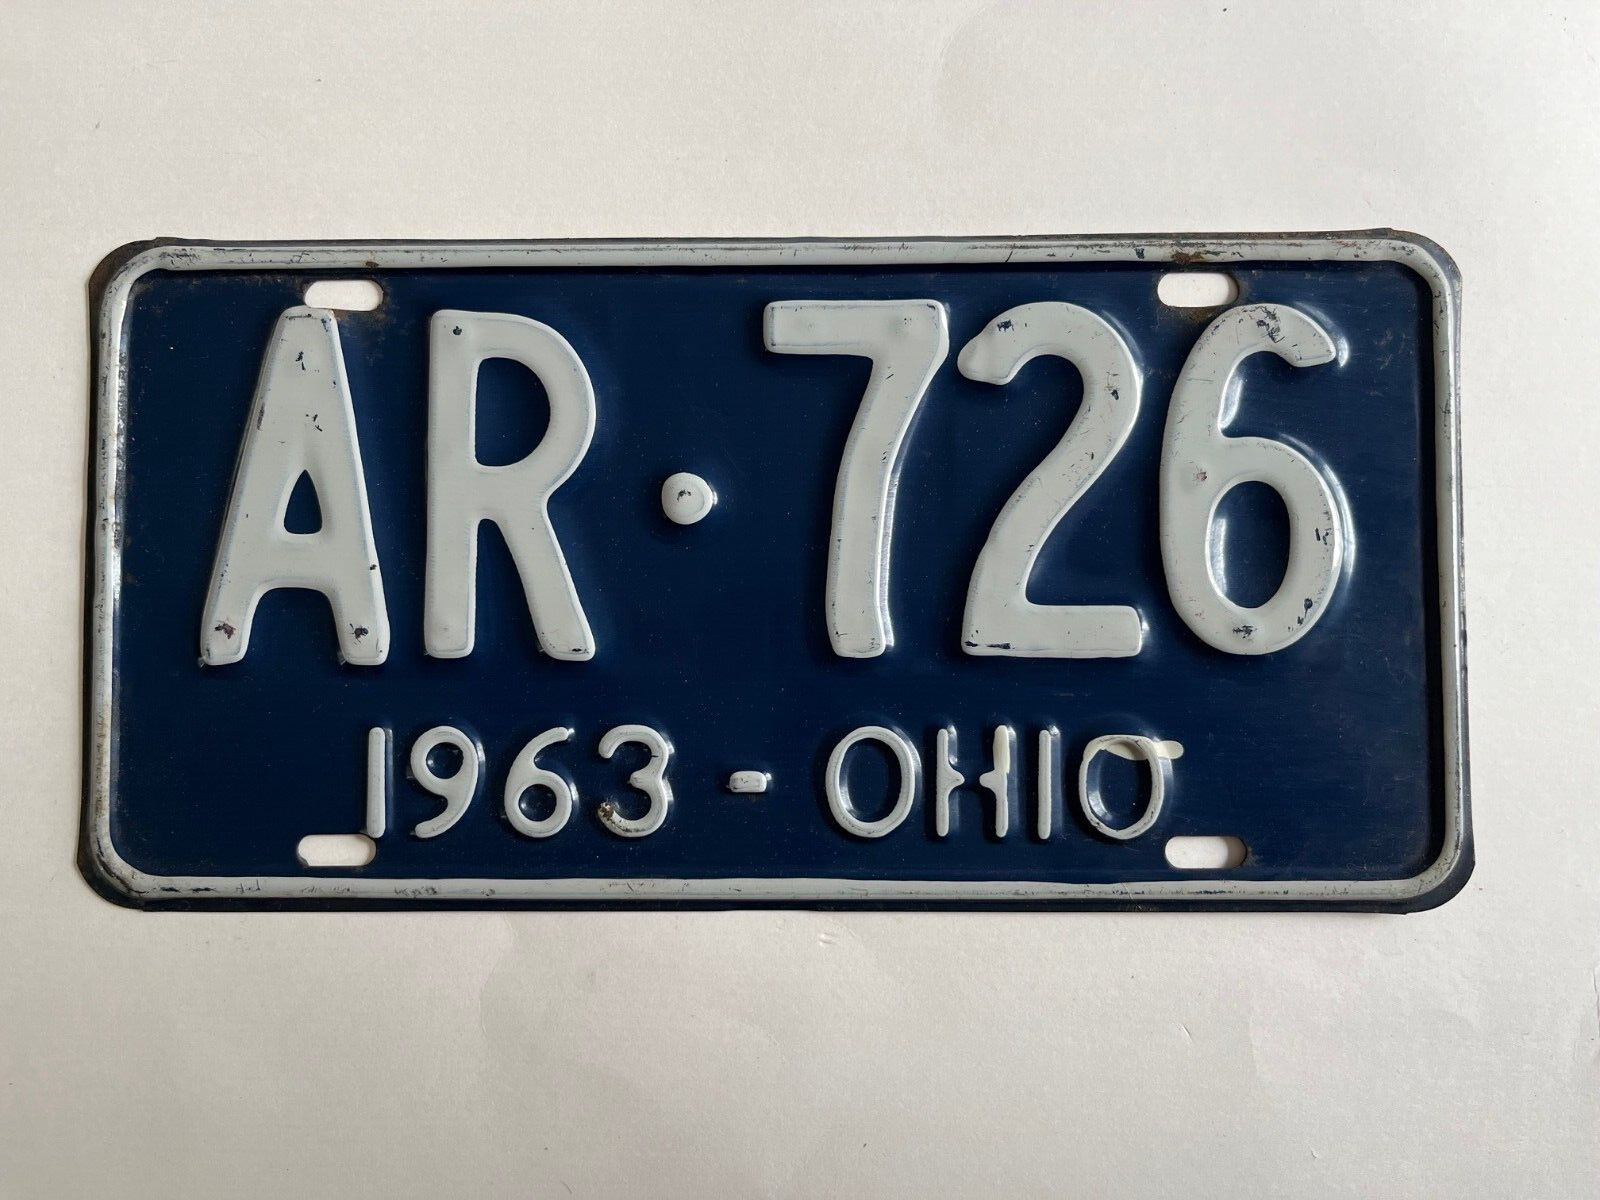 1963 Ohio License Plate Over 60 Years Old All Original Paint is still Glossy